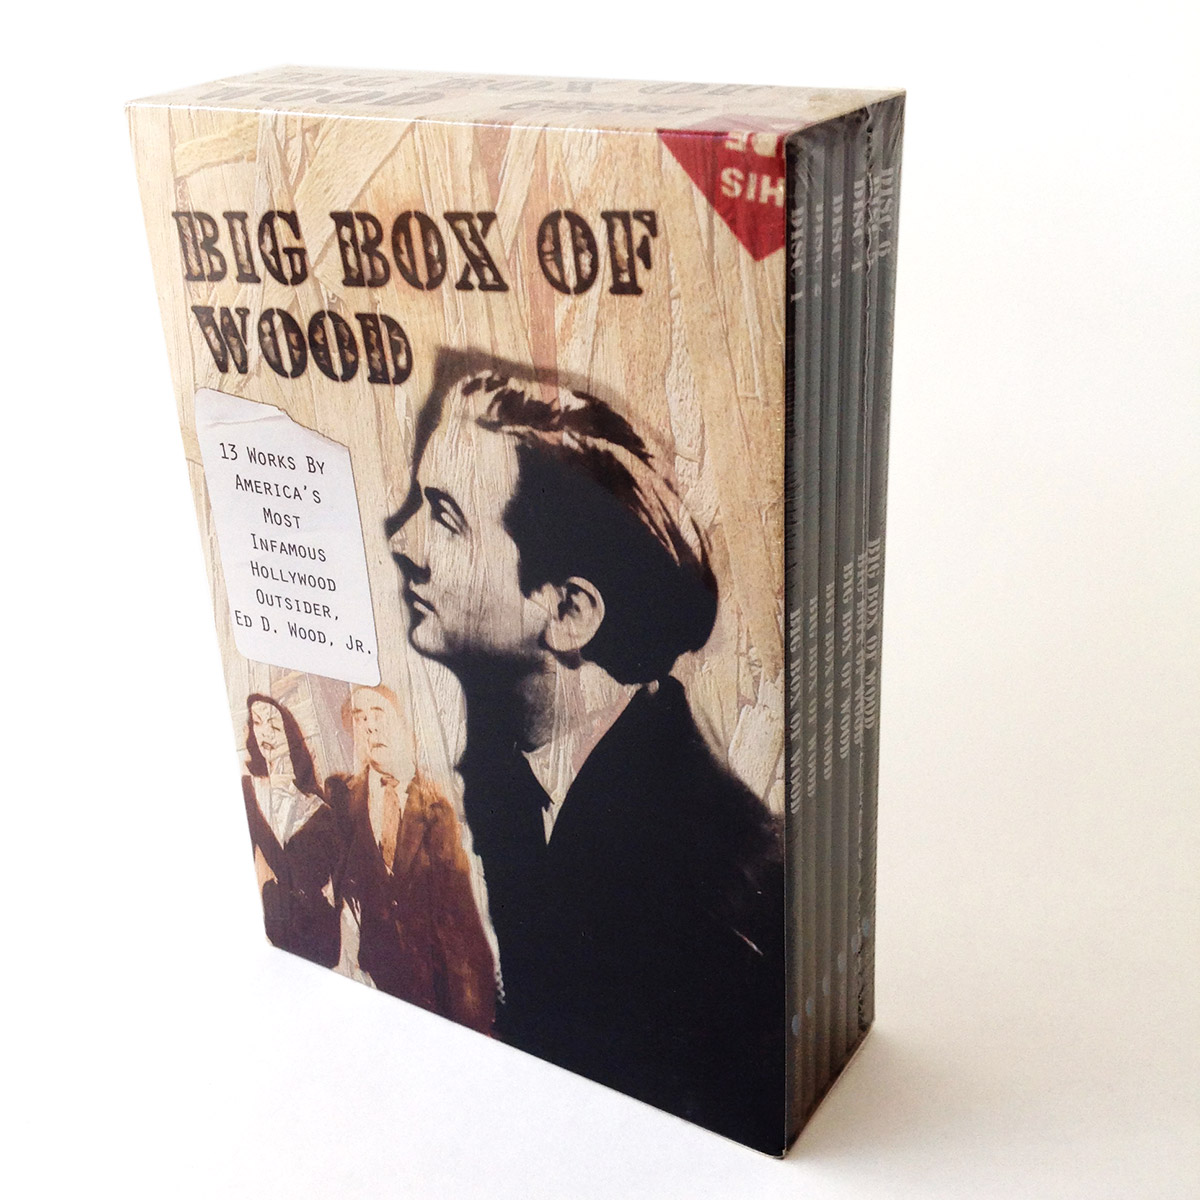 Big Box of Wood - DVD Replication and Packaging by OMM